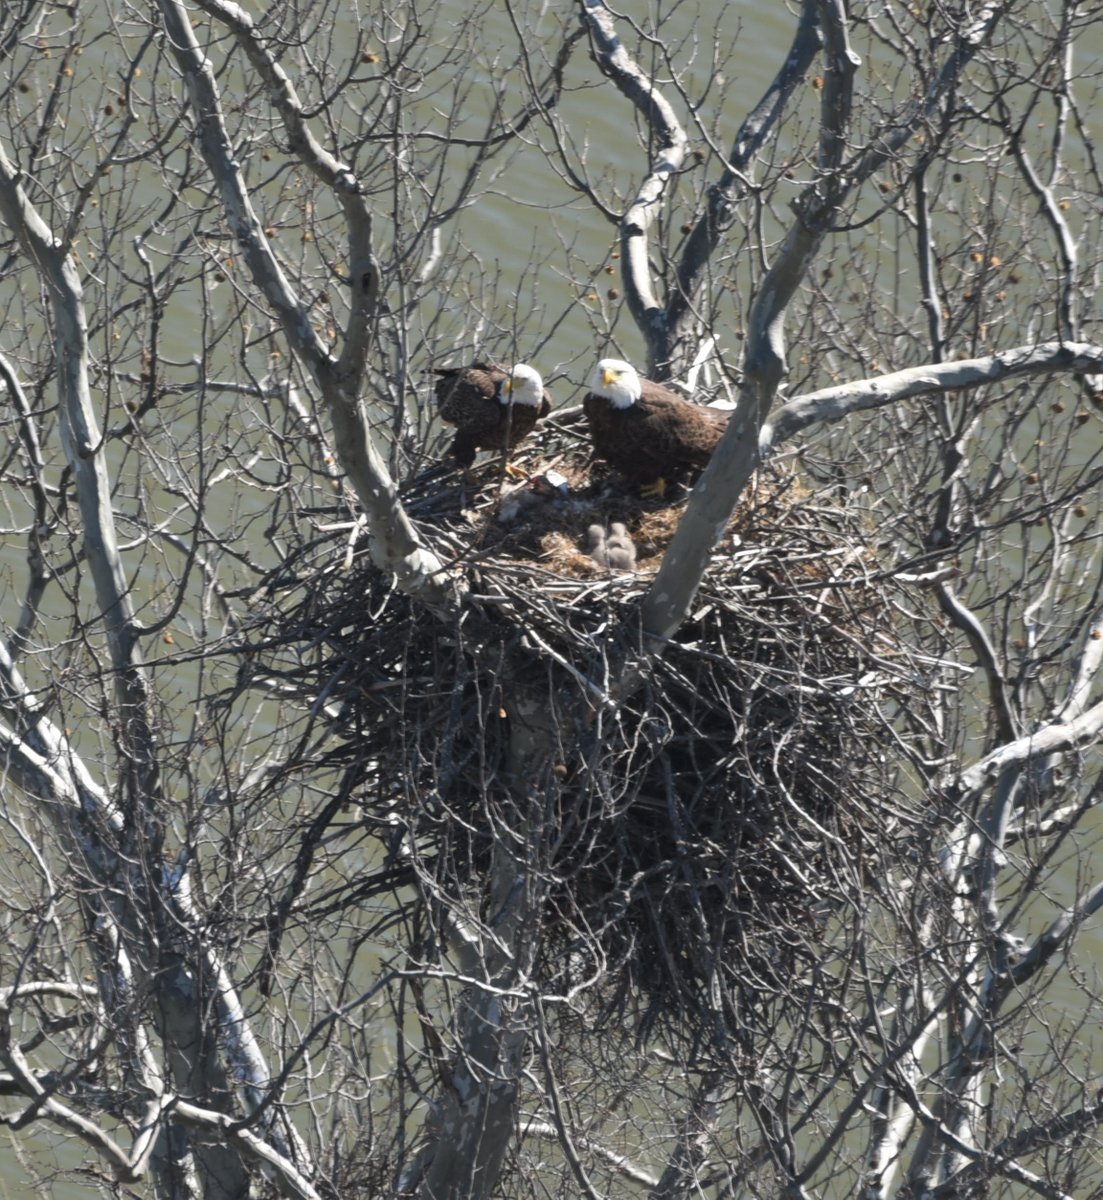 During this year's annual #eagle survey in the Washington Metropolitan Area, our Aviation Unit located an amazing active nest with baby chicks. It's only fitting that Eagle 1 🚁 would be able to find such an amazing sight!